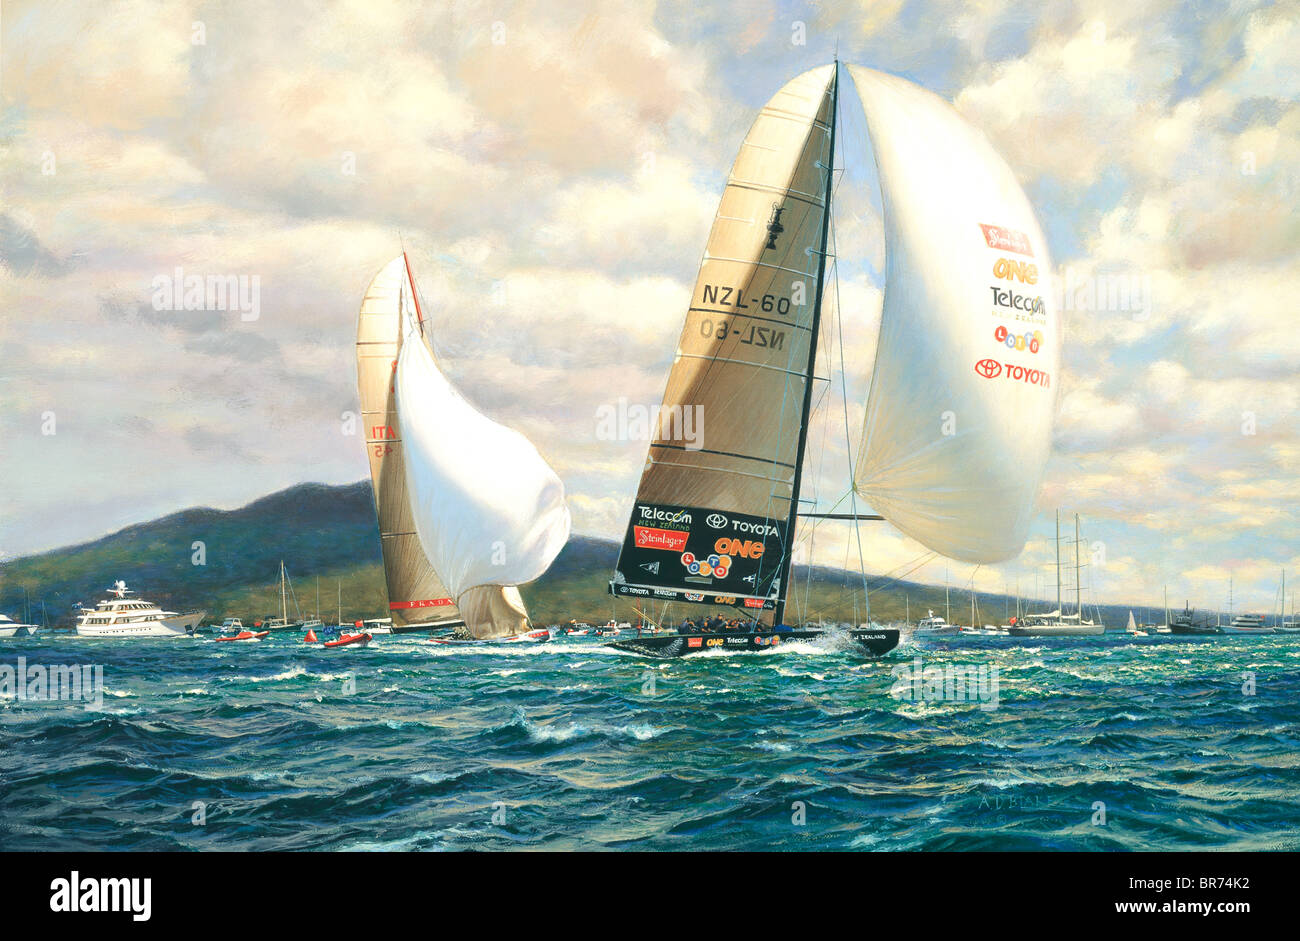 The Final Leg To Victory. New Zealand leads Prada, Race 5, America's Cup  2000. Oil on canvas, 41 cm x 61 cm, 2002. Collection Stock Photo - Alamy